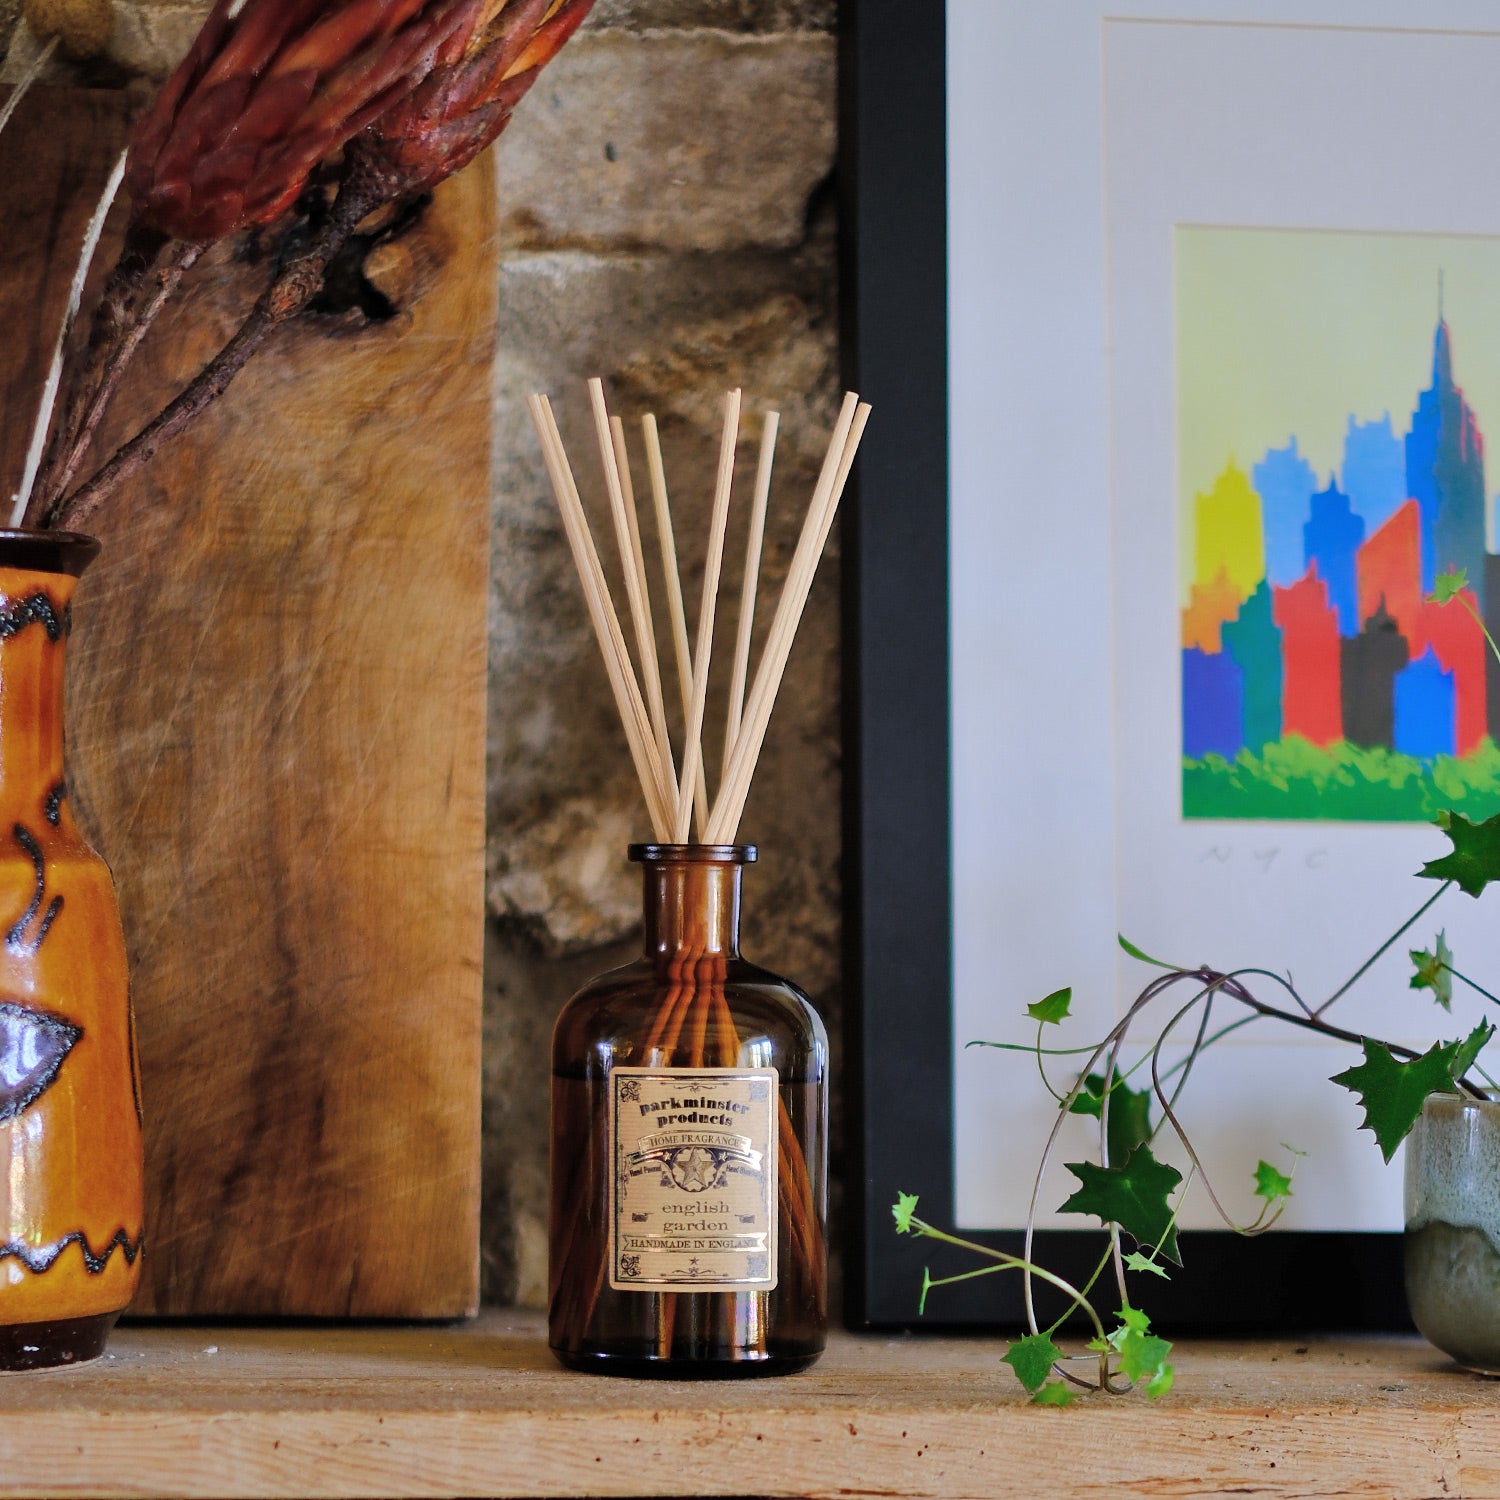 200ml English Garden Reed Diffuser by Parkminster Home Fragrance, capturing the essence of an English cottage garden with blooming plants, from the Apothecary Collection, handcrafted in Cornwall